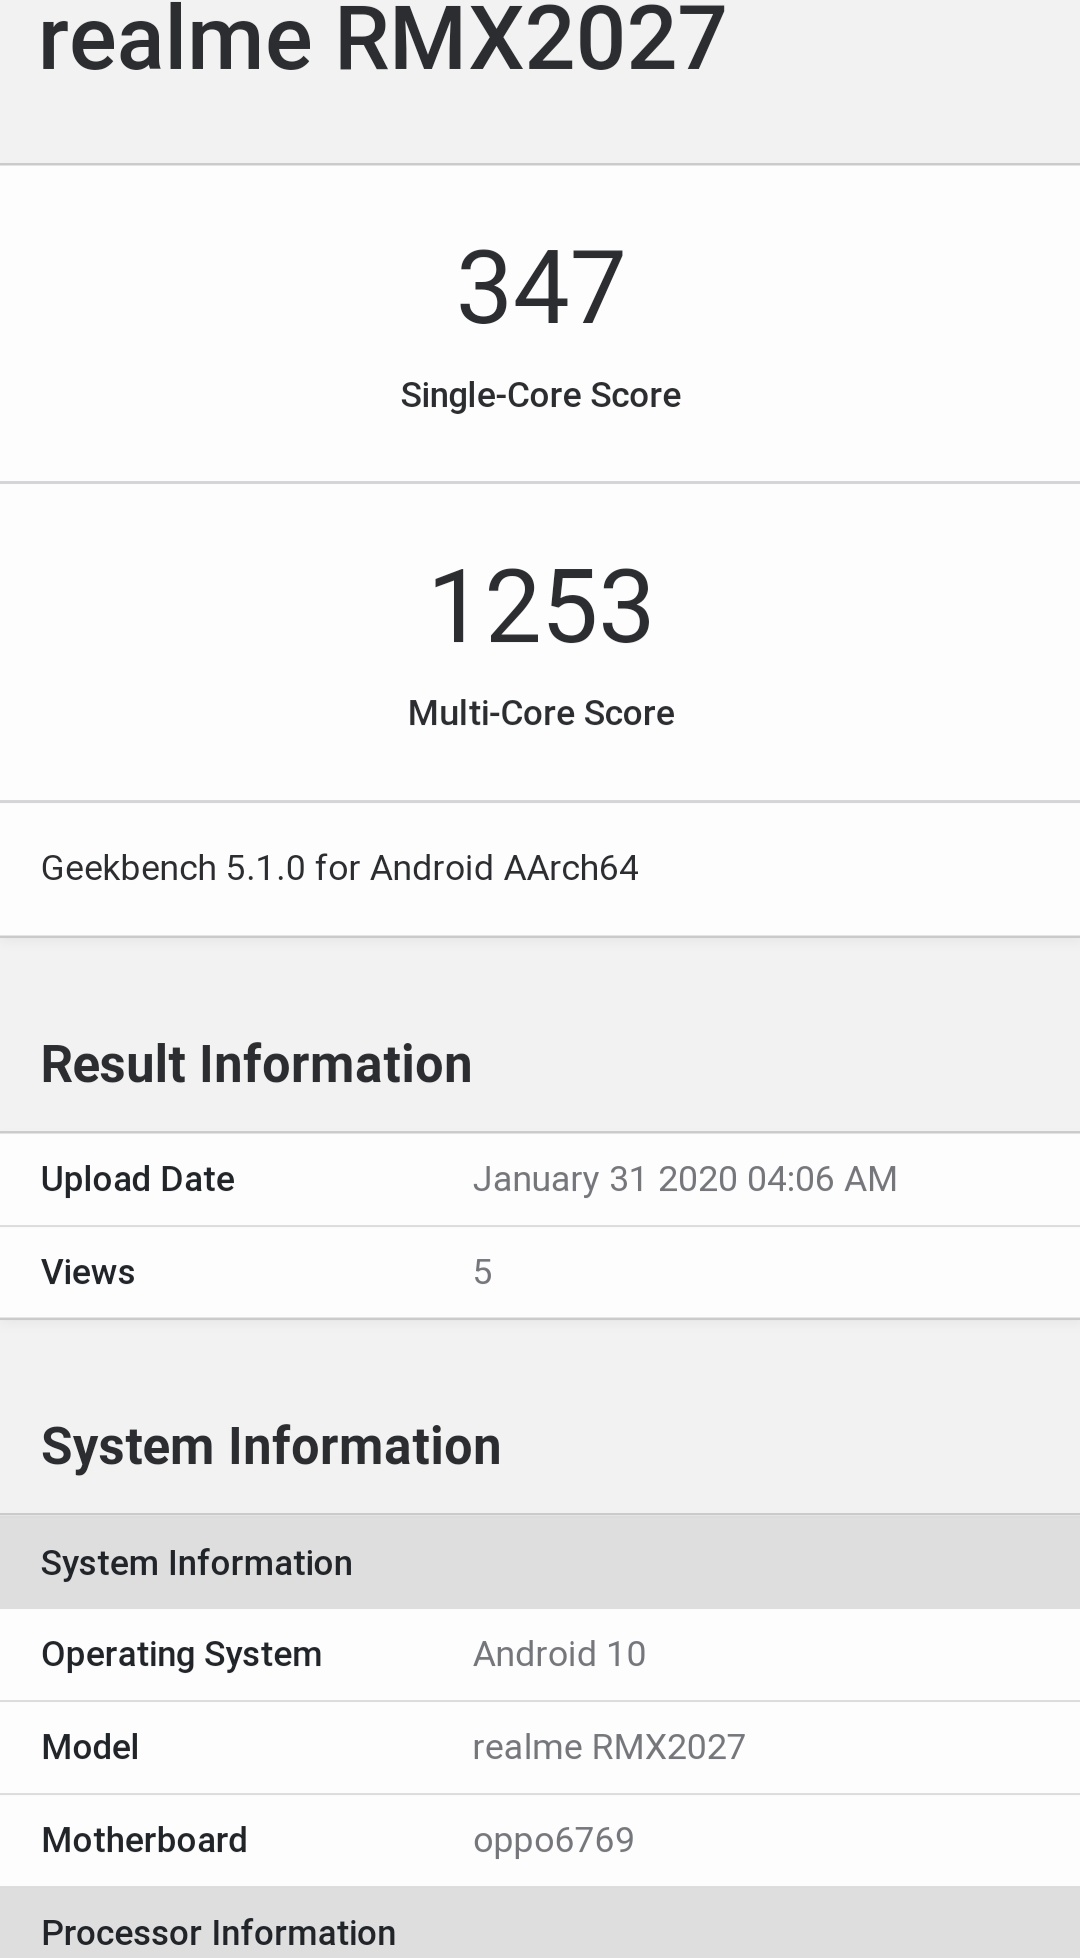 Realme RMX2027 spotted on the Geekbench with 4GB RAM, most likely Realme 6